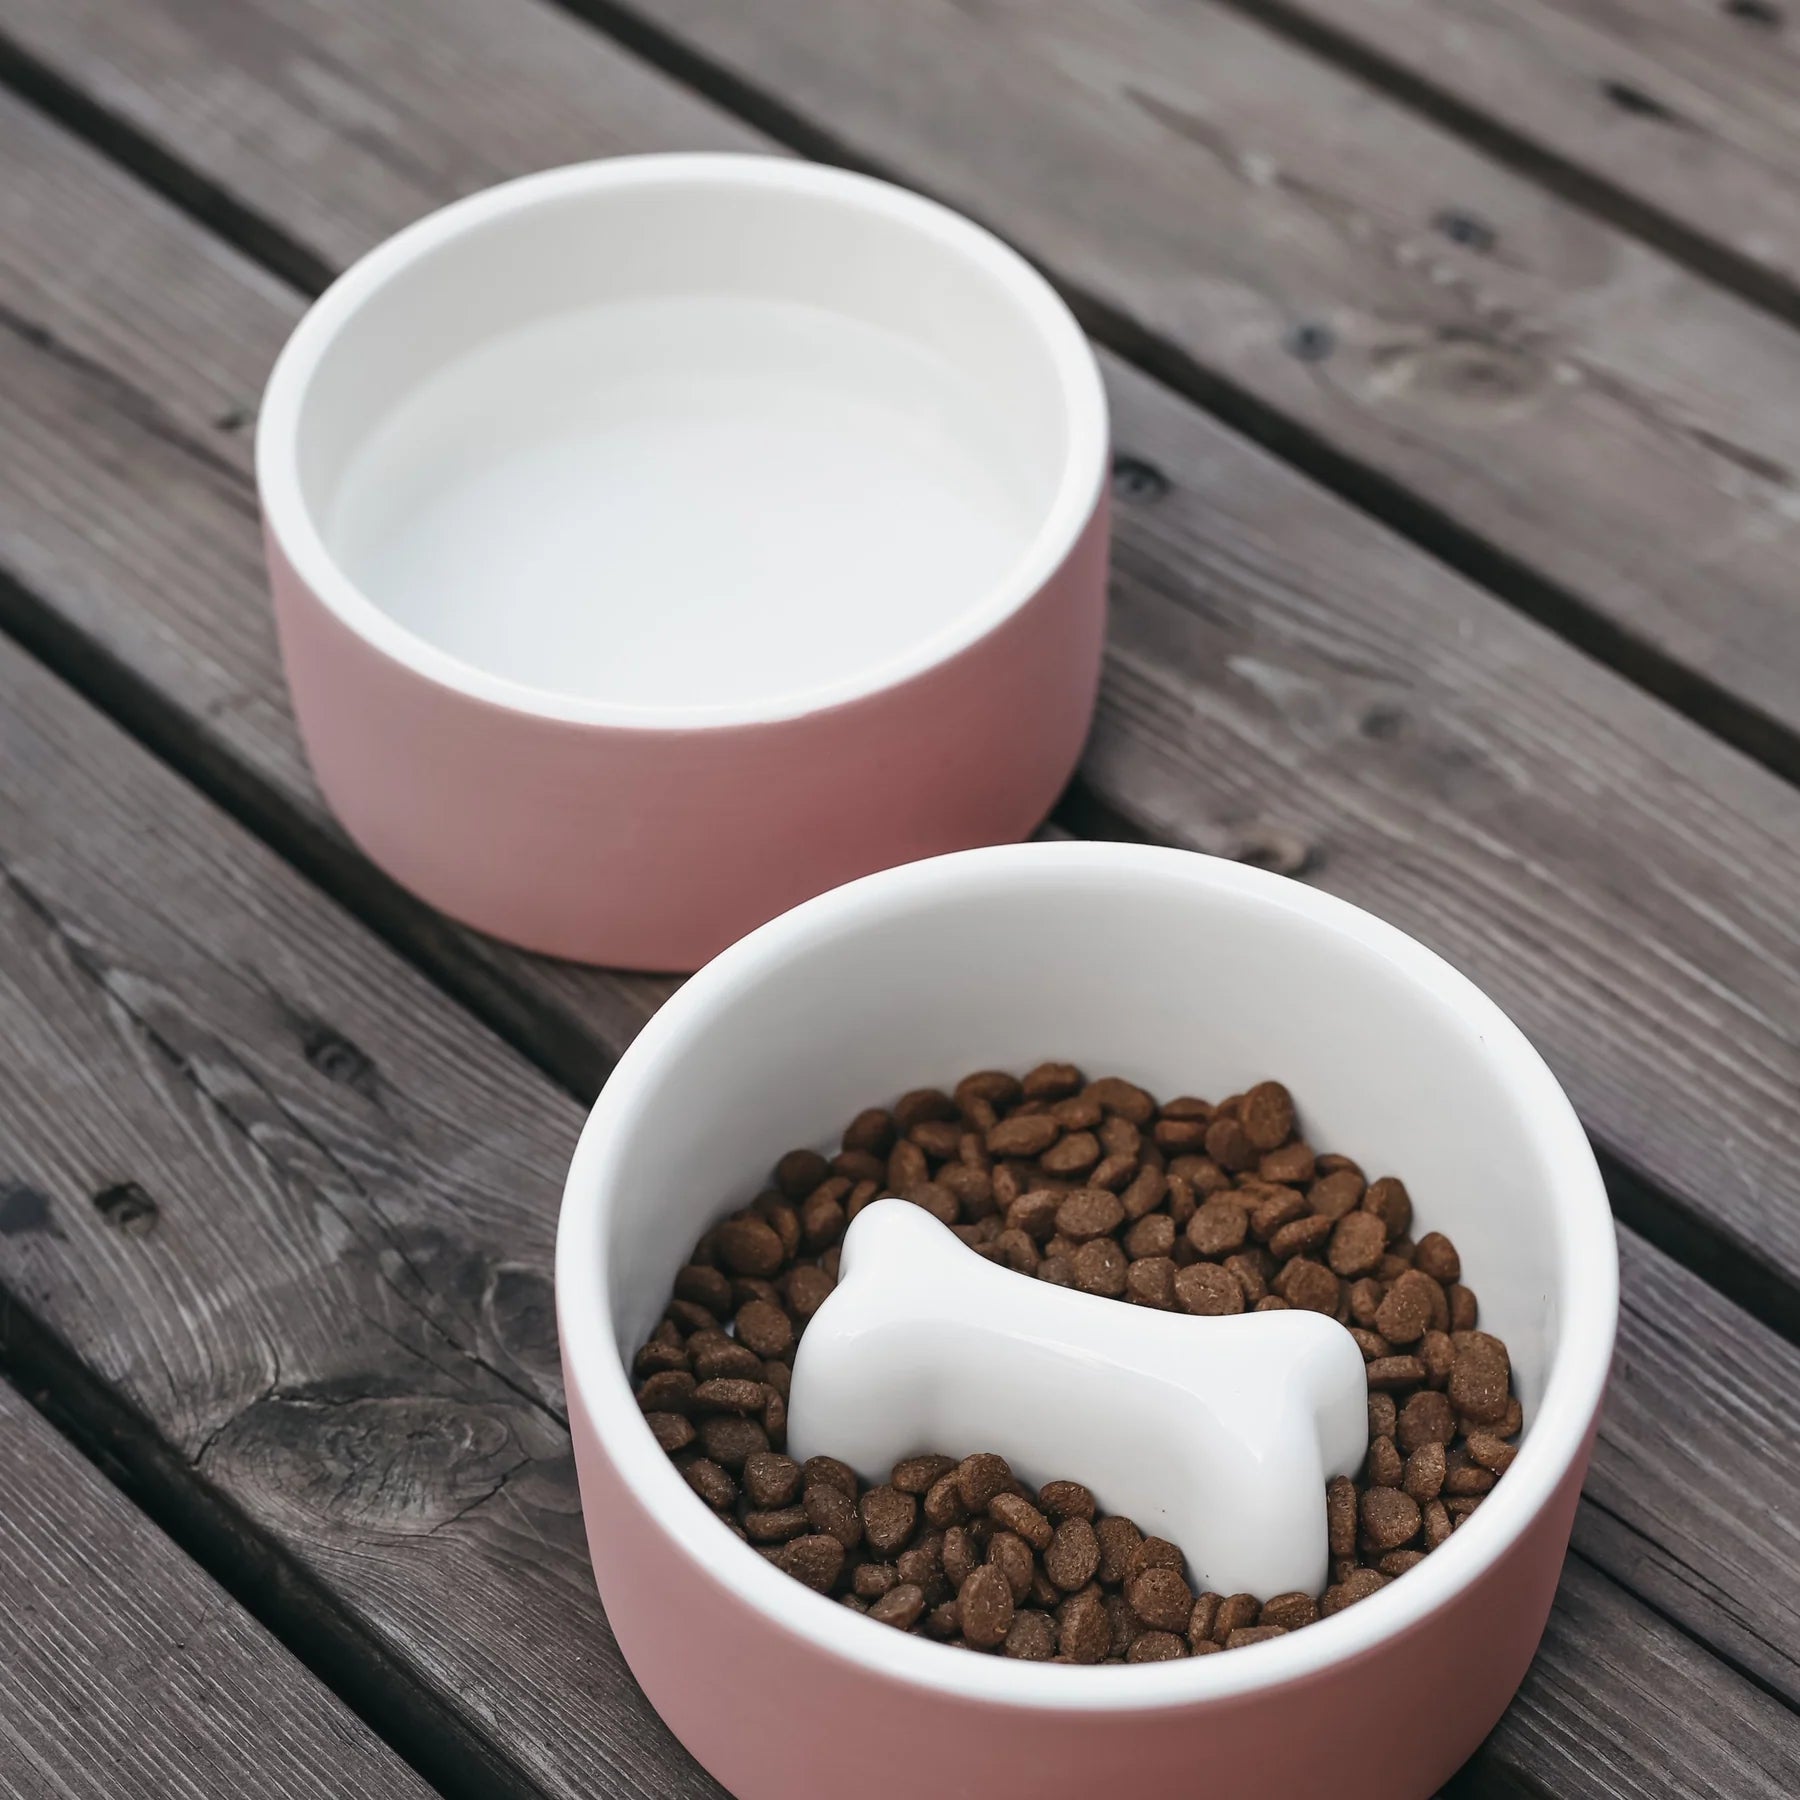 Cool Bowl for Pets